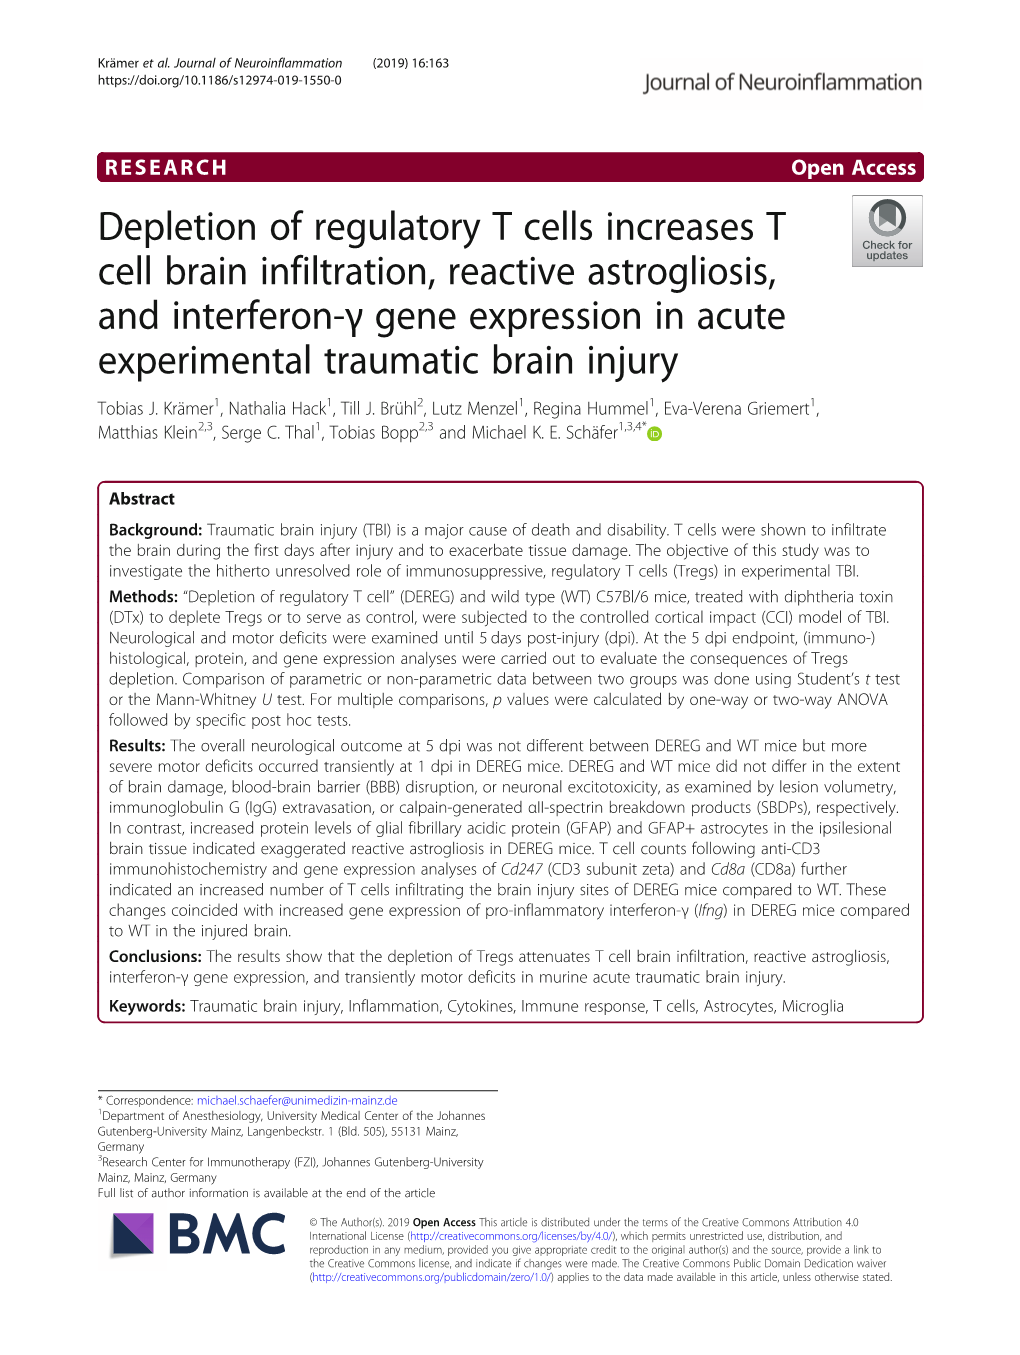 Depletion of Regulatory T Cells Increases T Cell Brain Infiltration